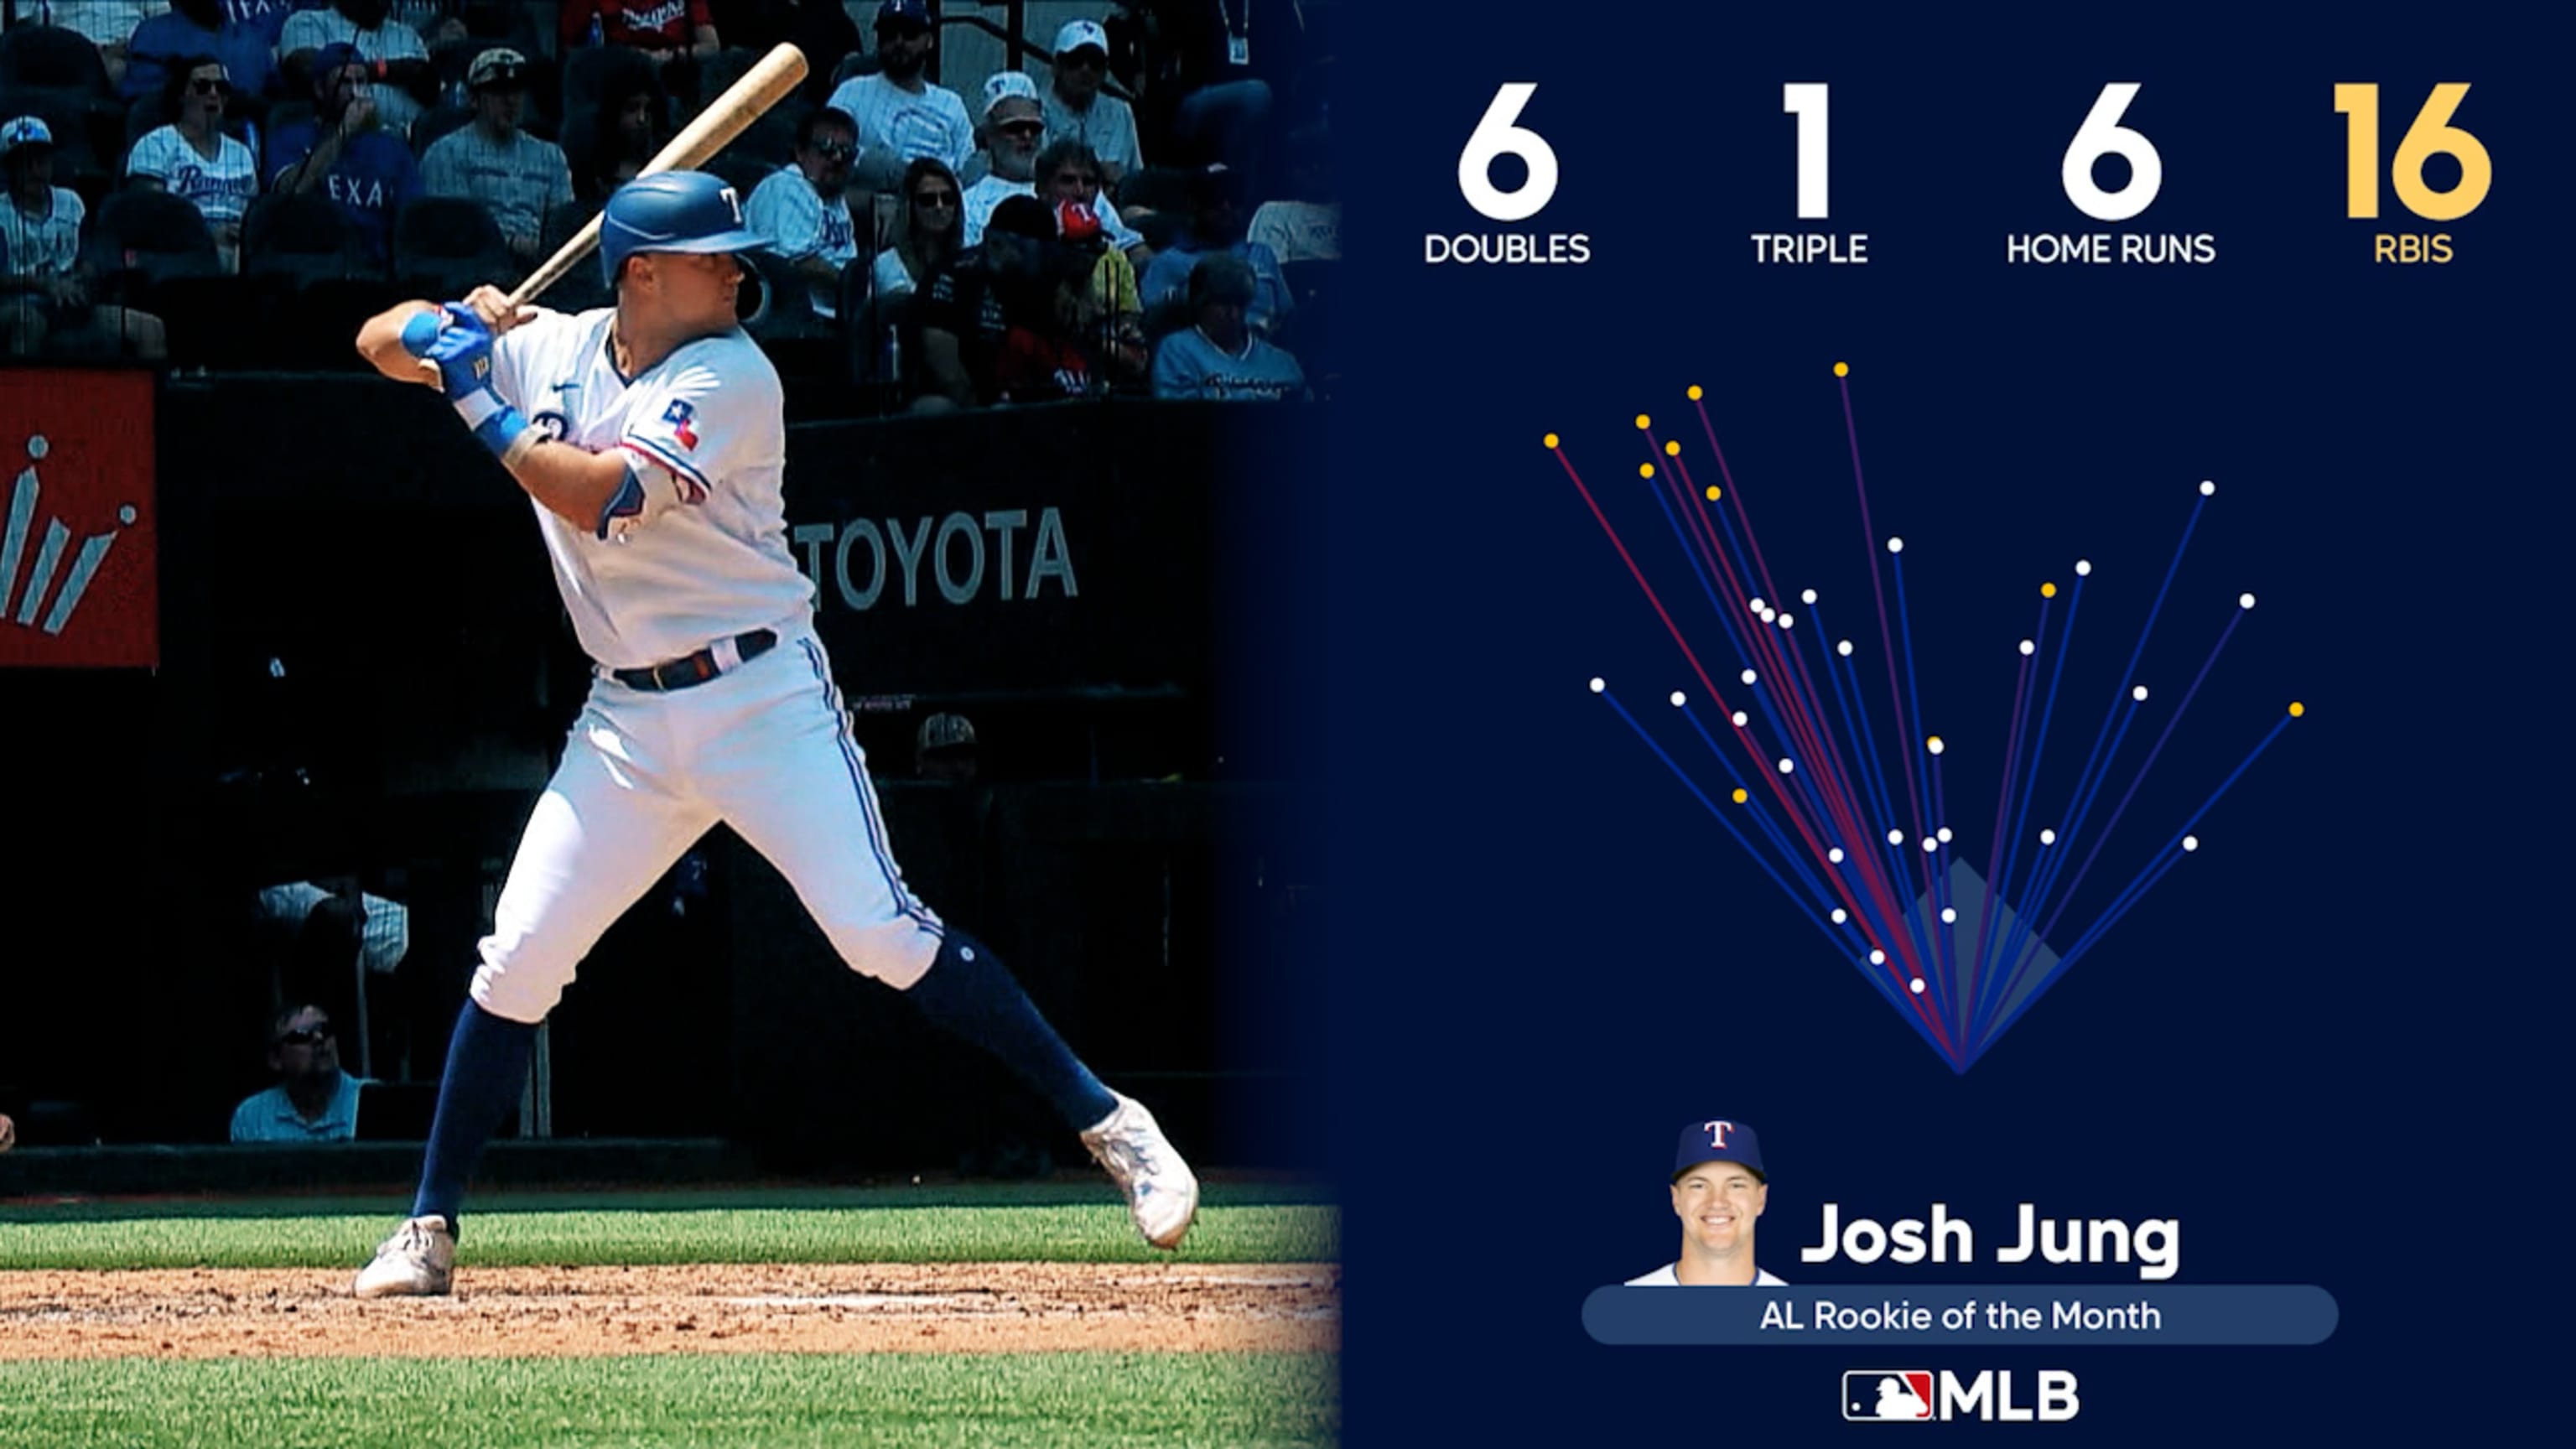 Josh Jung stays hot, earns second Rookie of the Month Award